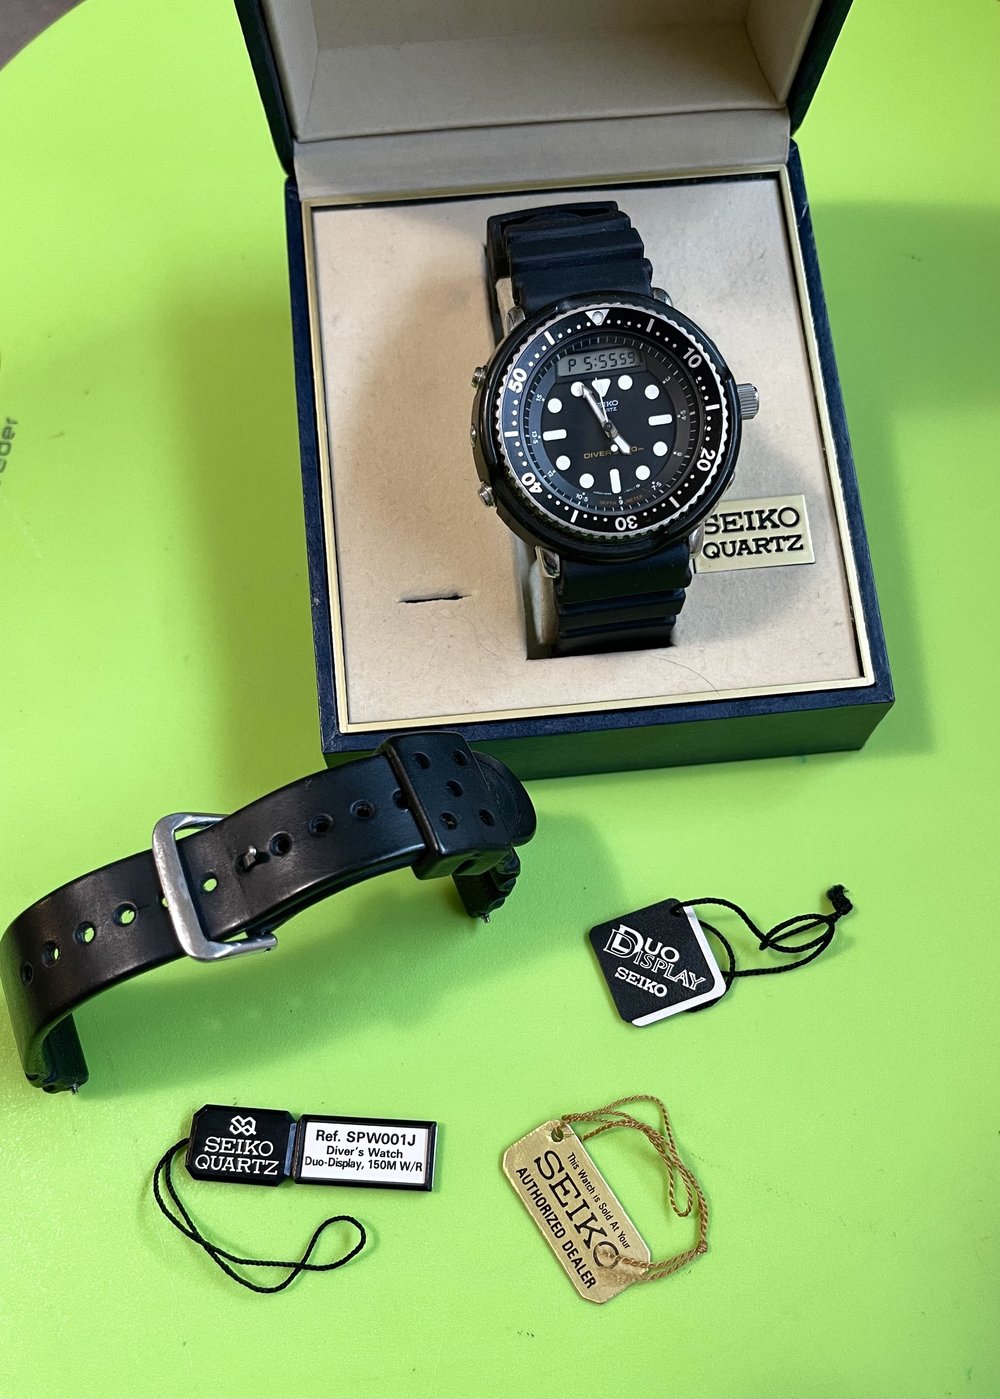 Seiko H558-5009 “Arnie” with box, tags, original and a modern JDM Seiko  DAL1BP from July 1987 — Klein Vintage Watch